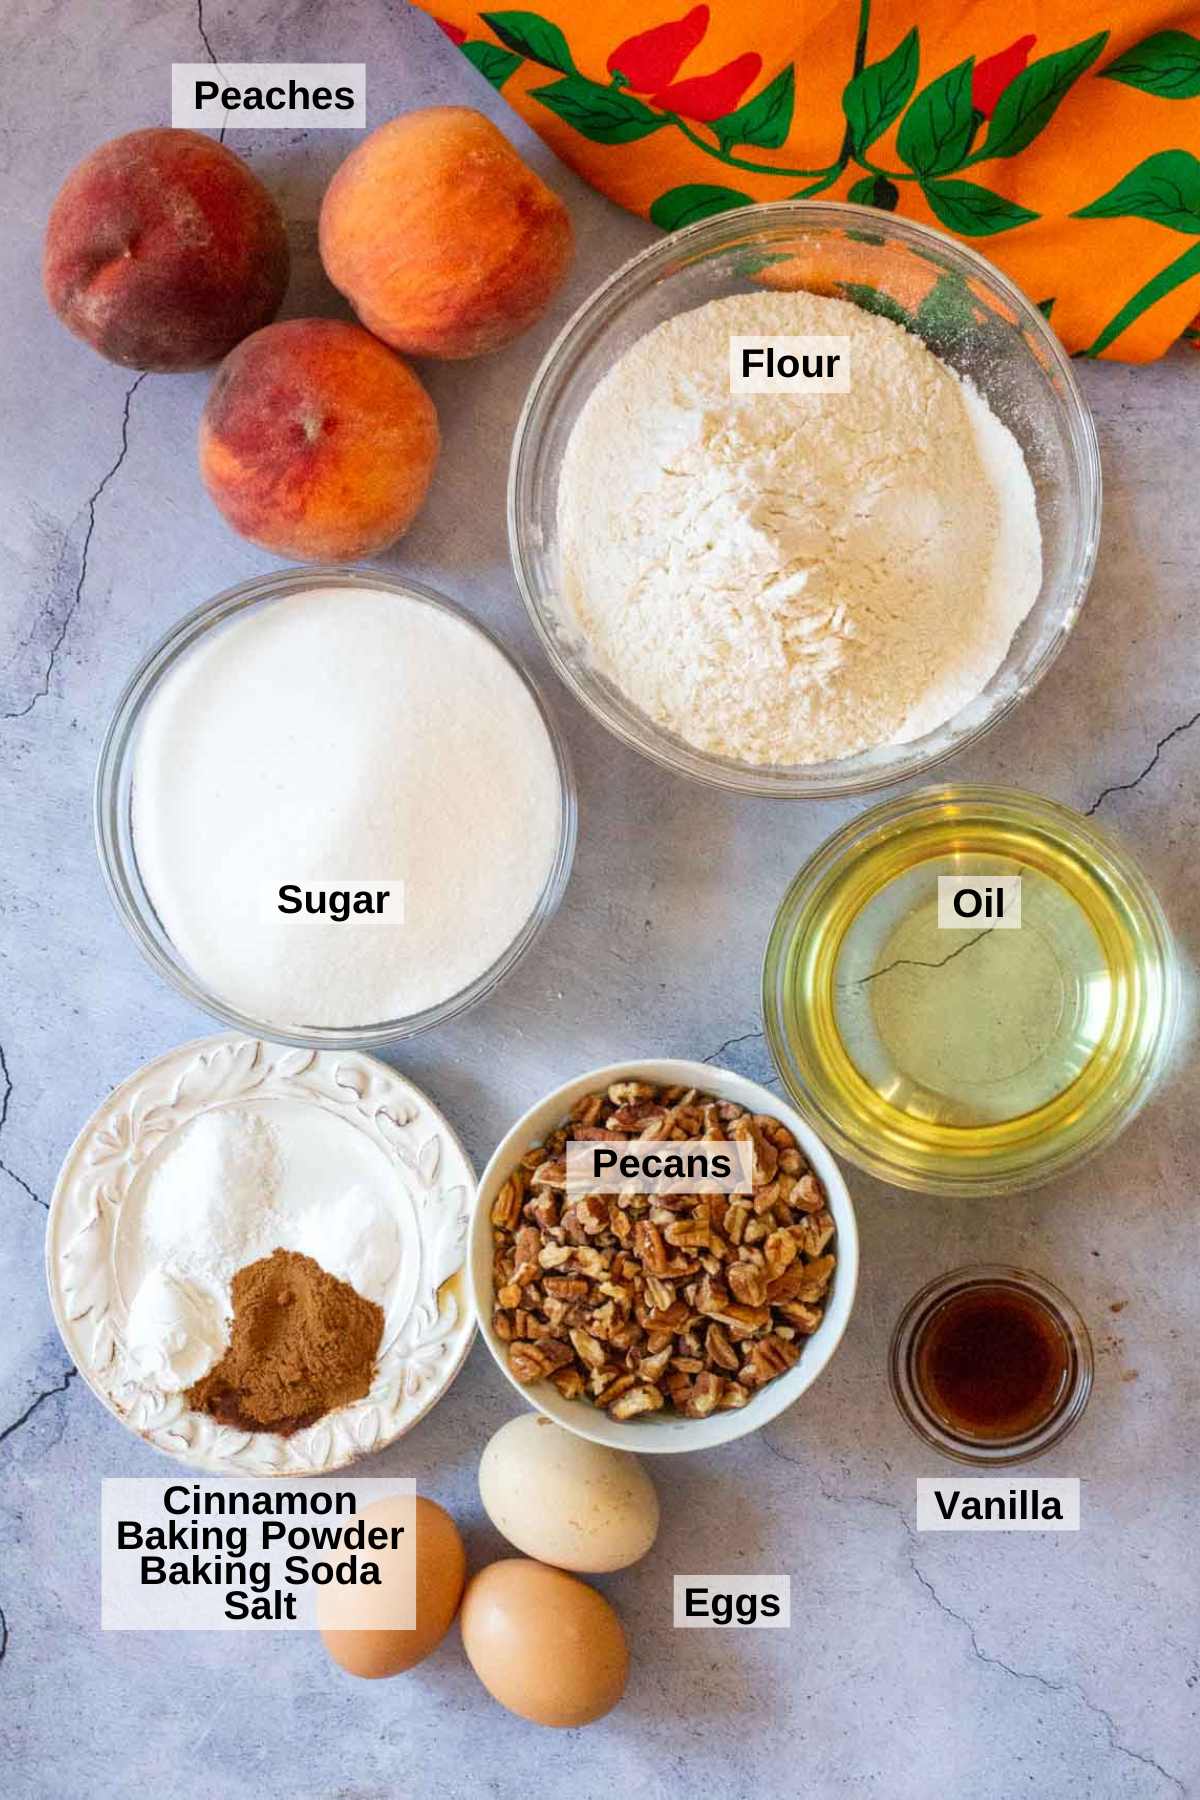 Ingredients to make peach bread.